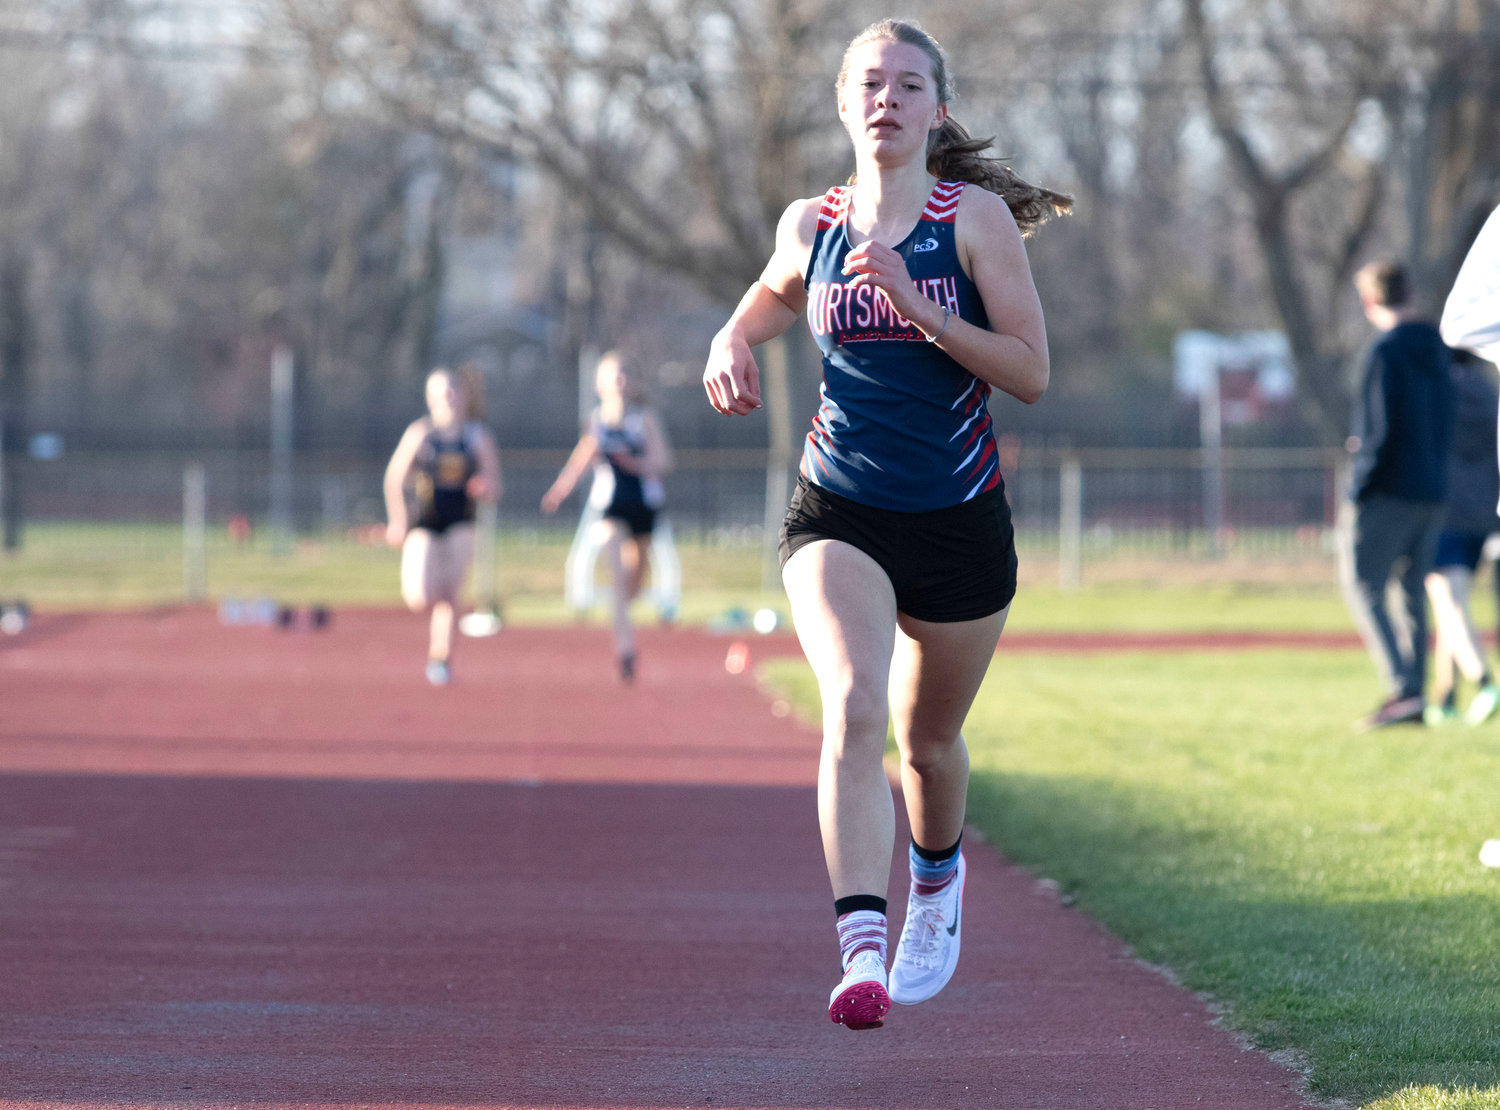 Addison May of PHS took first place in the girls’ 1,500-meter.